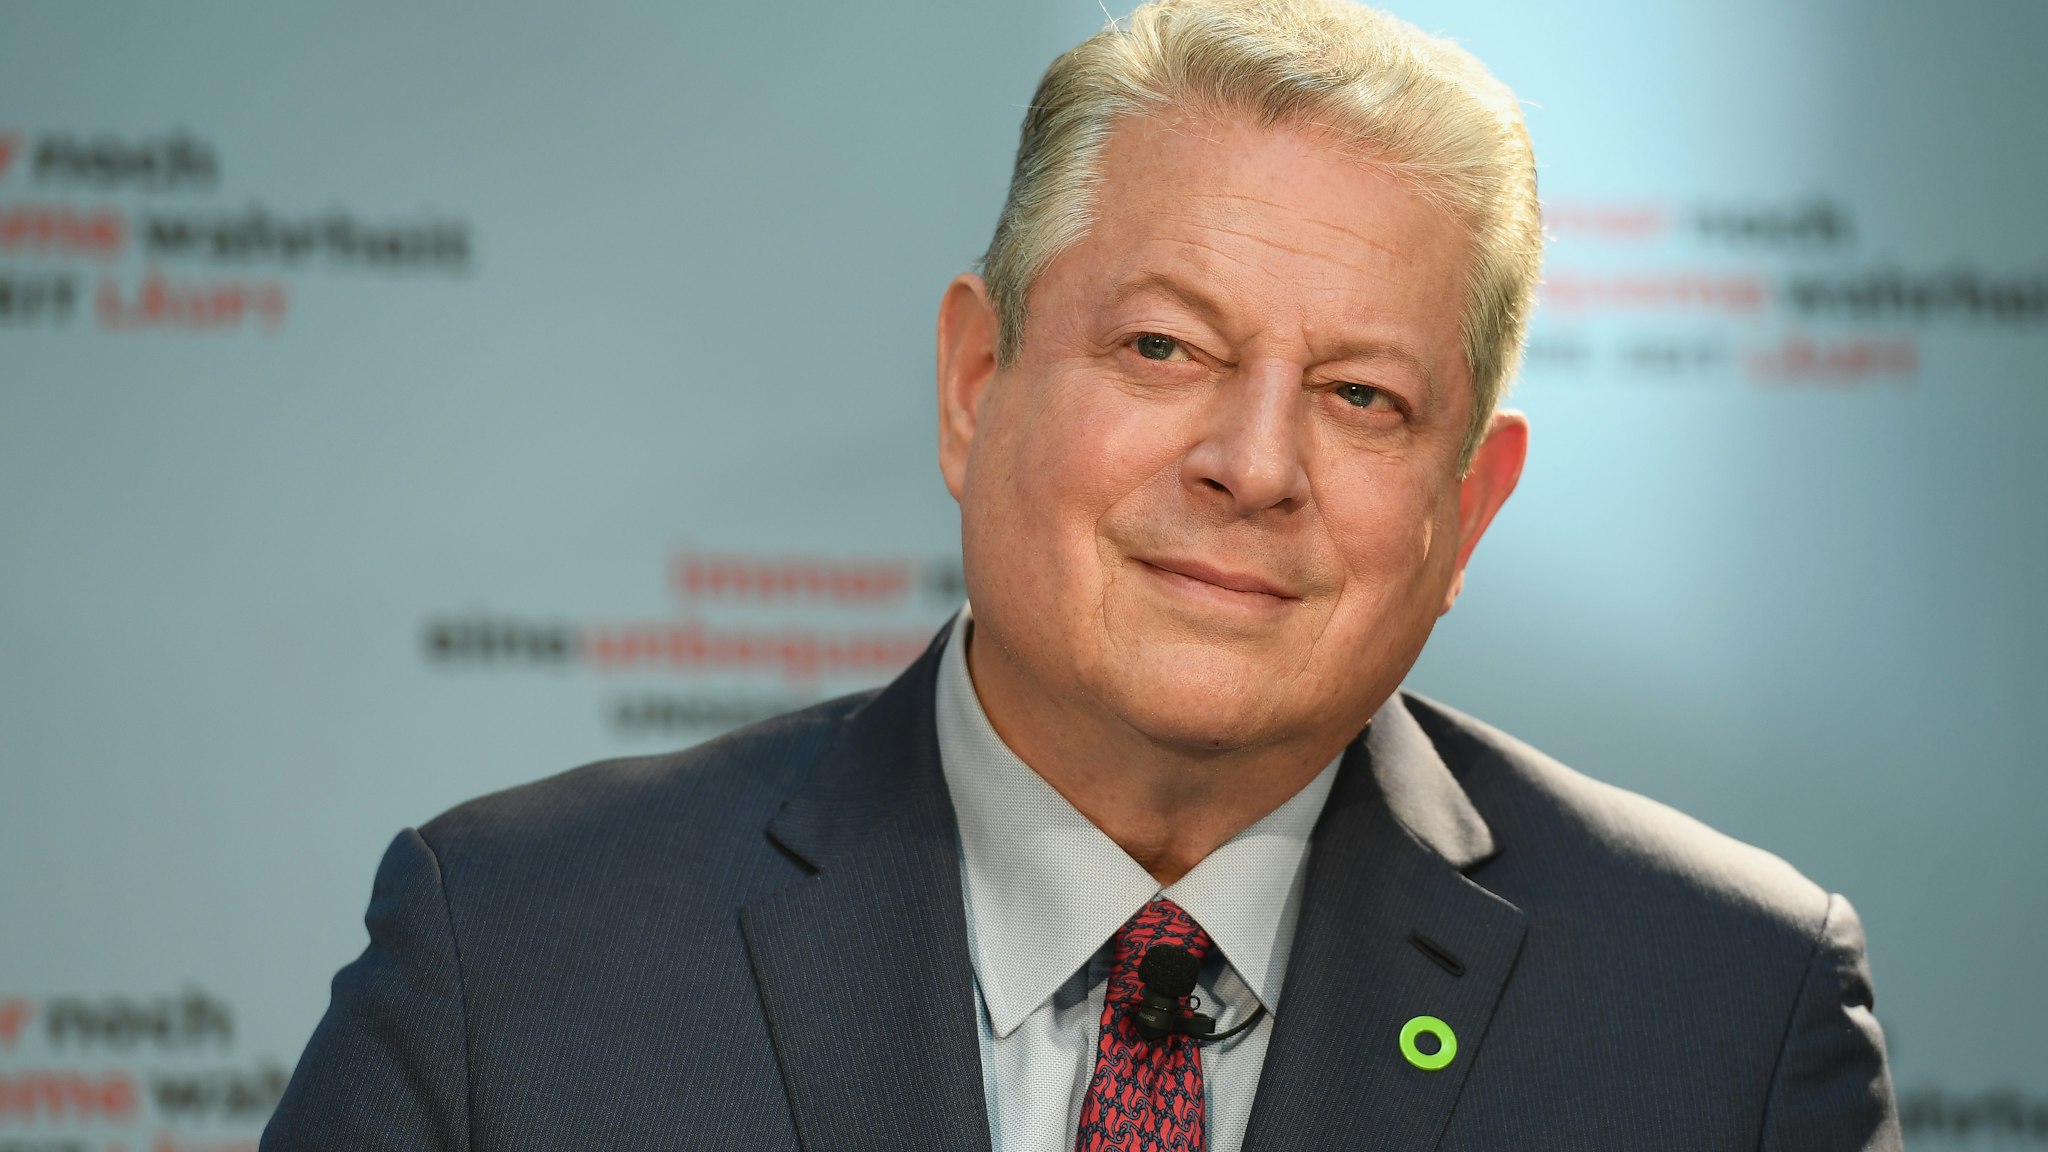 BERLIN, GERMANY - AUGUST 08: Former Vice President Al Gore attends a press conference for 'An Inconvenient Sequel: Truth to Power' at Hotel Adlon on August 8, 2017 in Berlin, Germany. (Photo by Matthias Nareyek/Getty Images for Paramount Pictures)